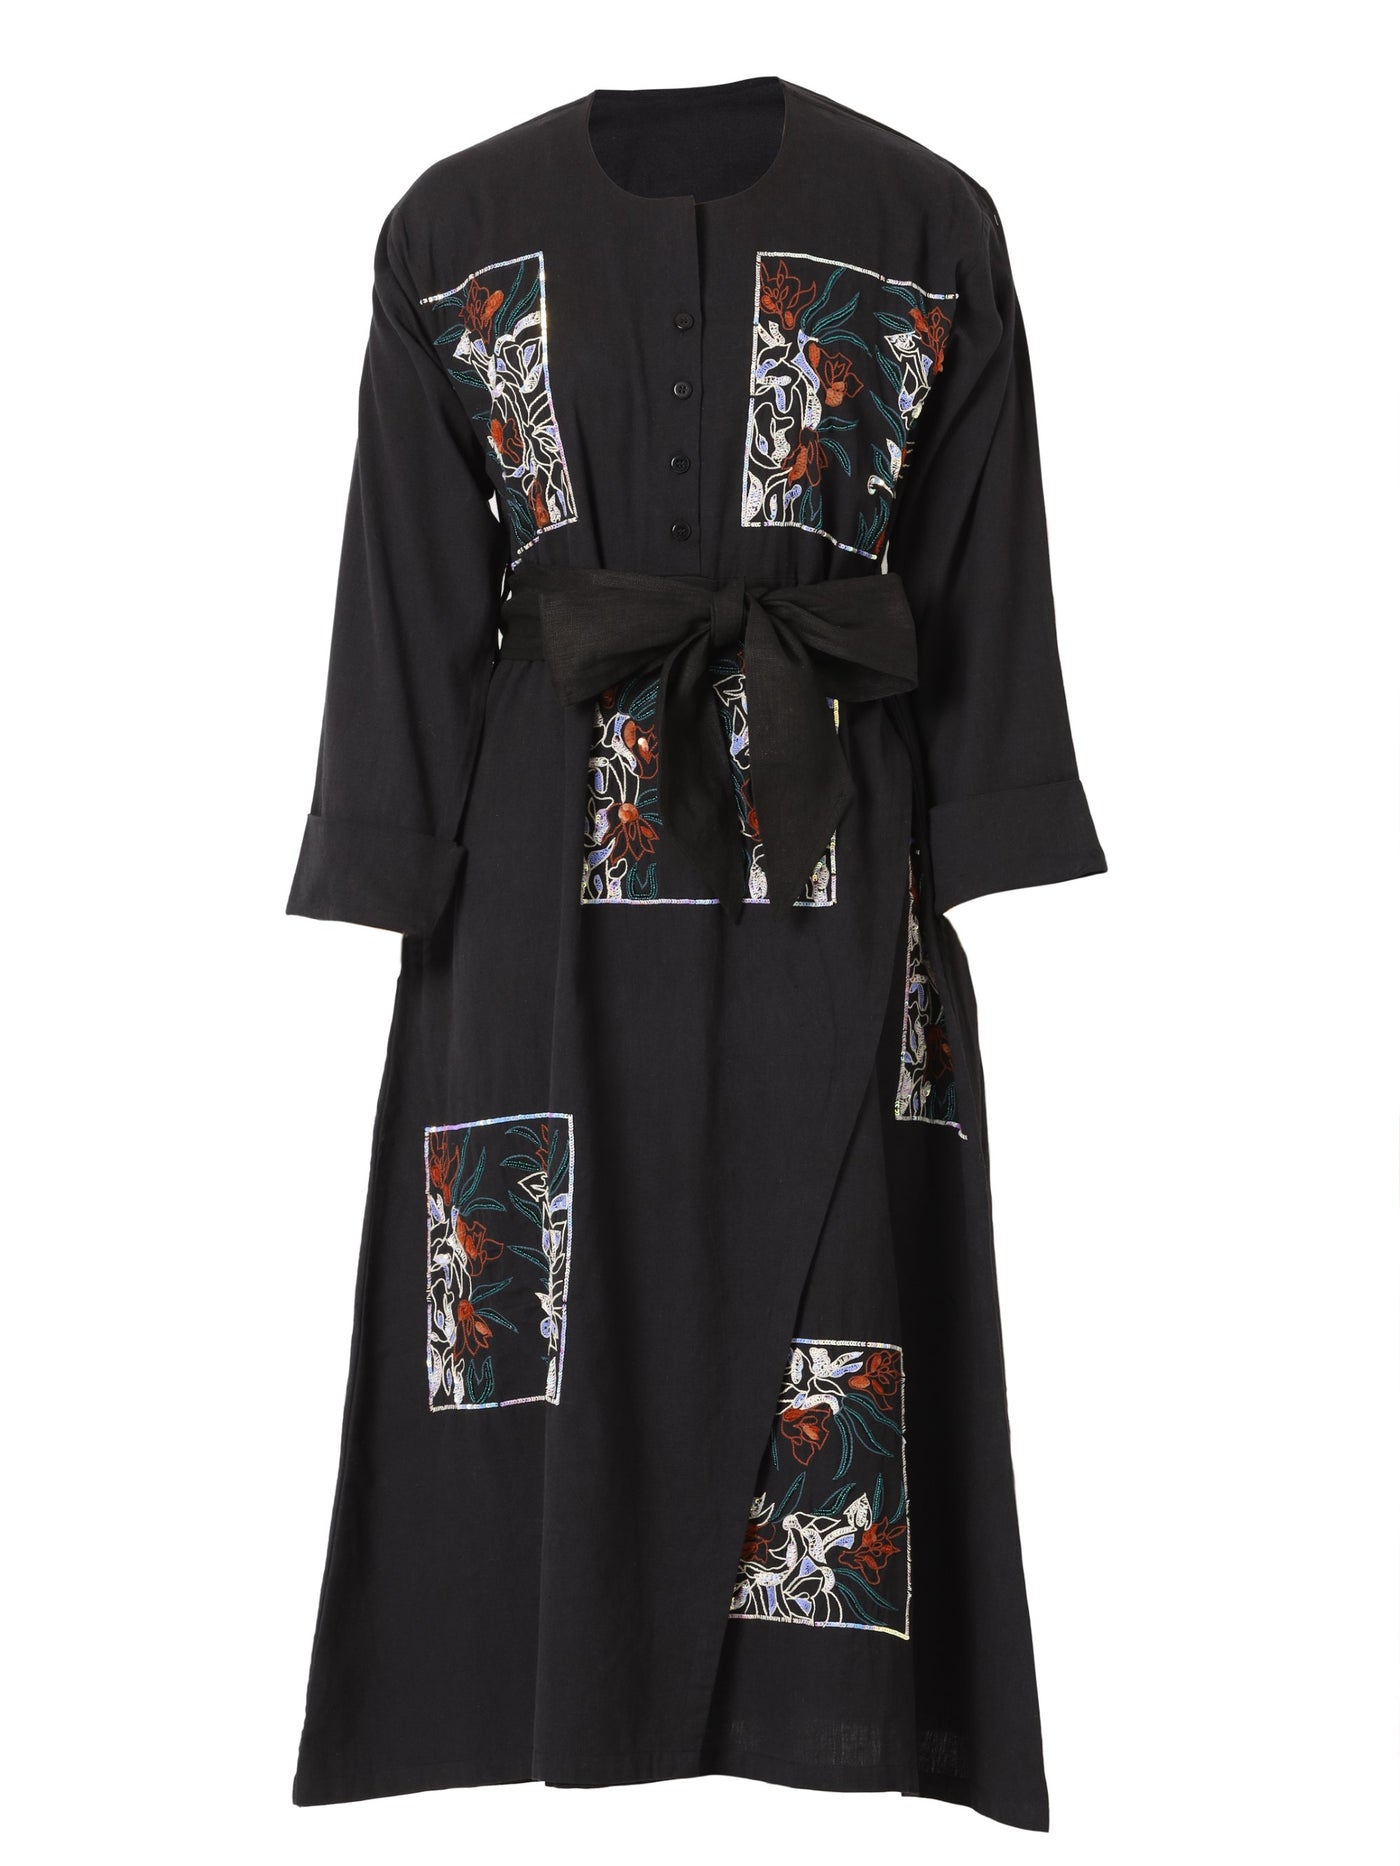 Anthracite Embroidered Wrap Dress